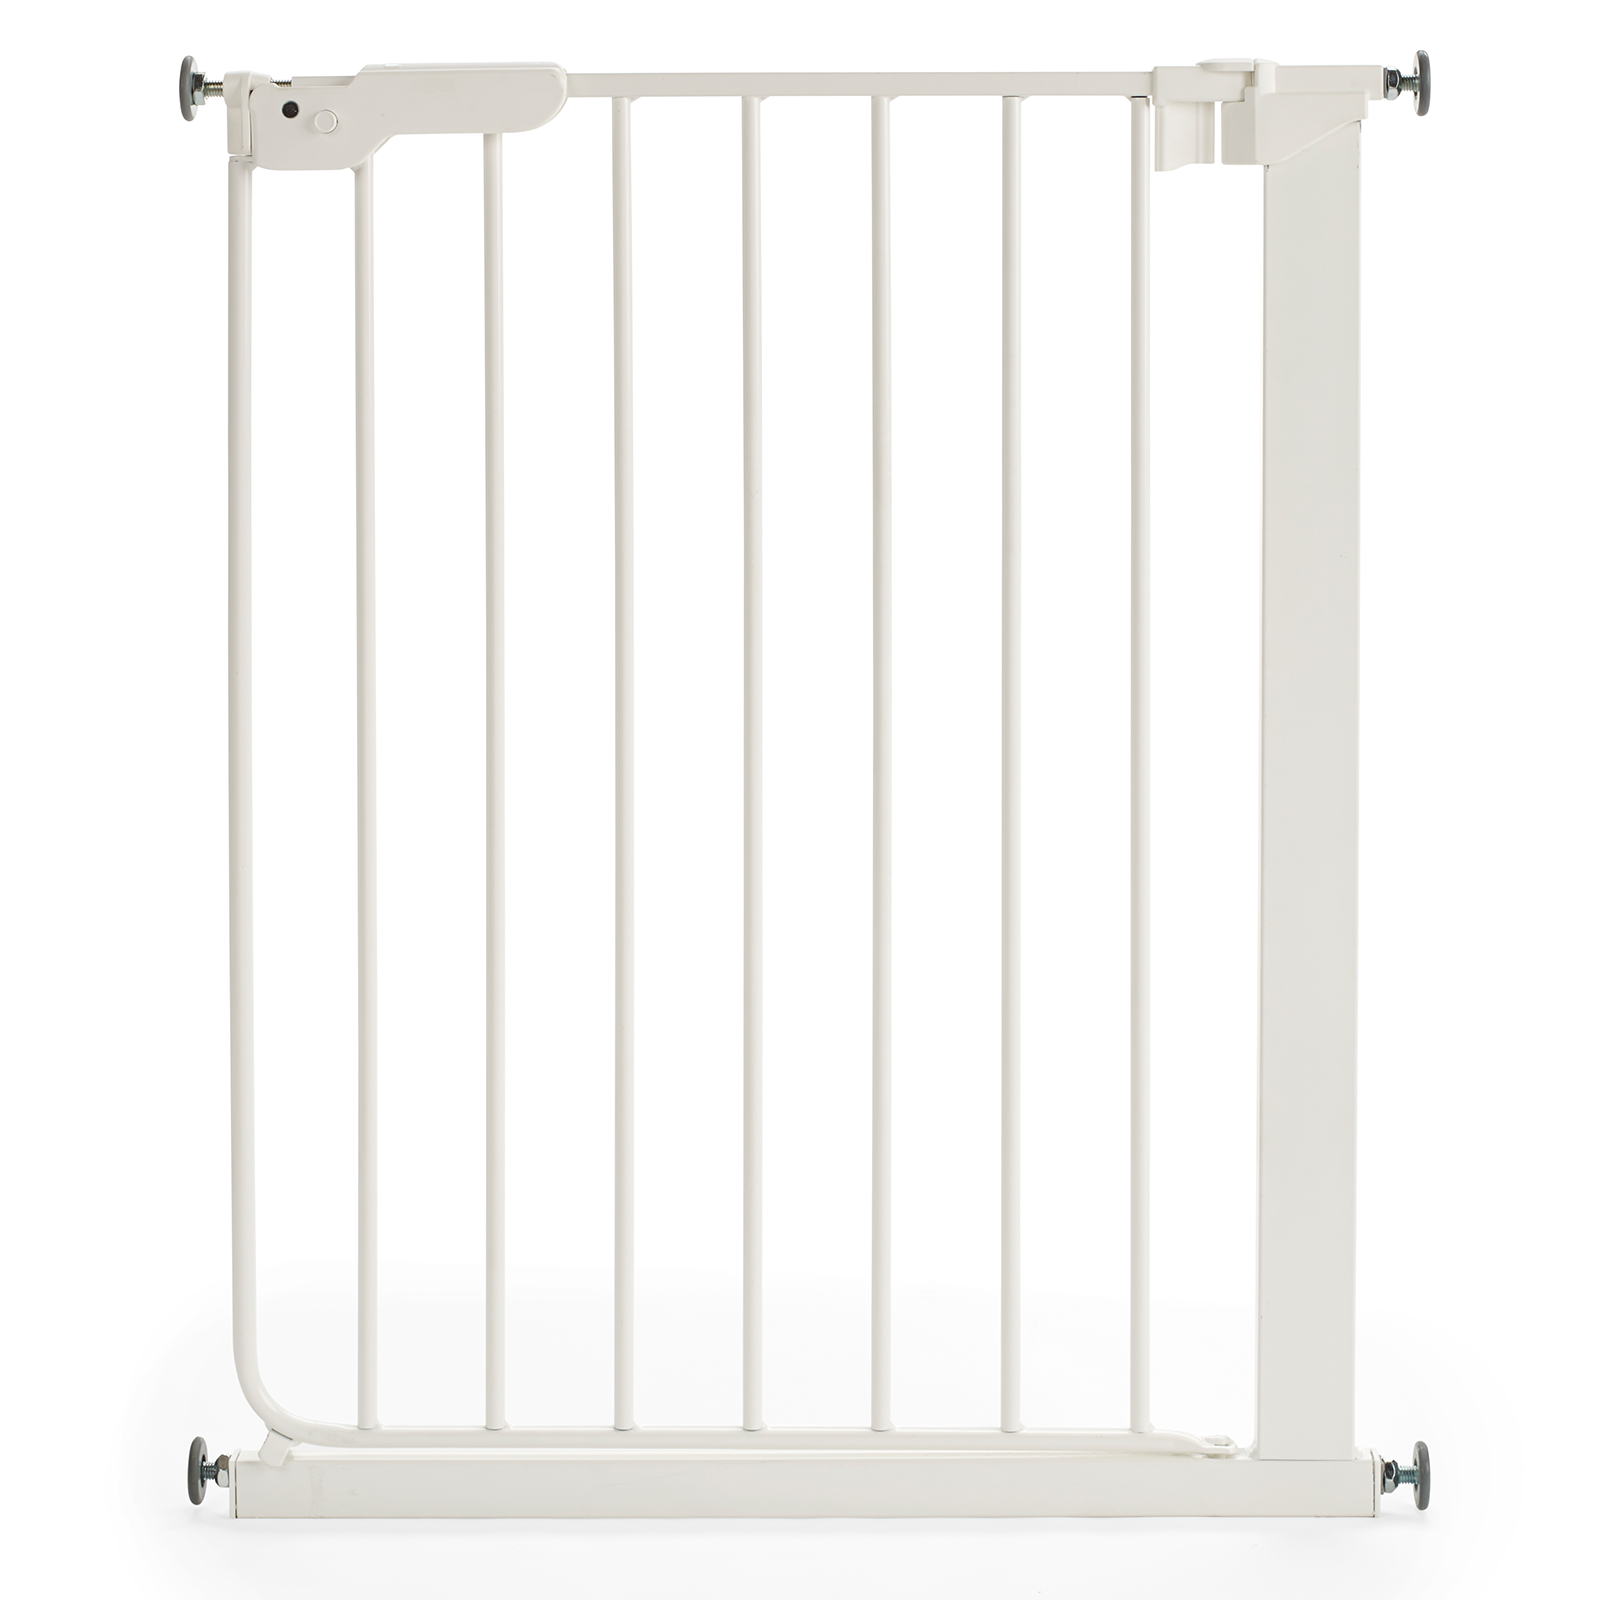 BabyDan Super Slim Fit Safety Gate in - Fits Openings 60.5-66.5cm